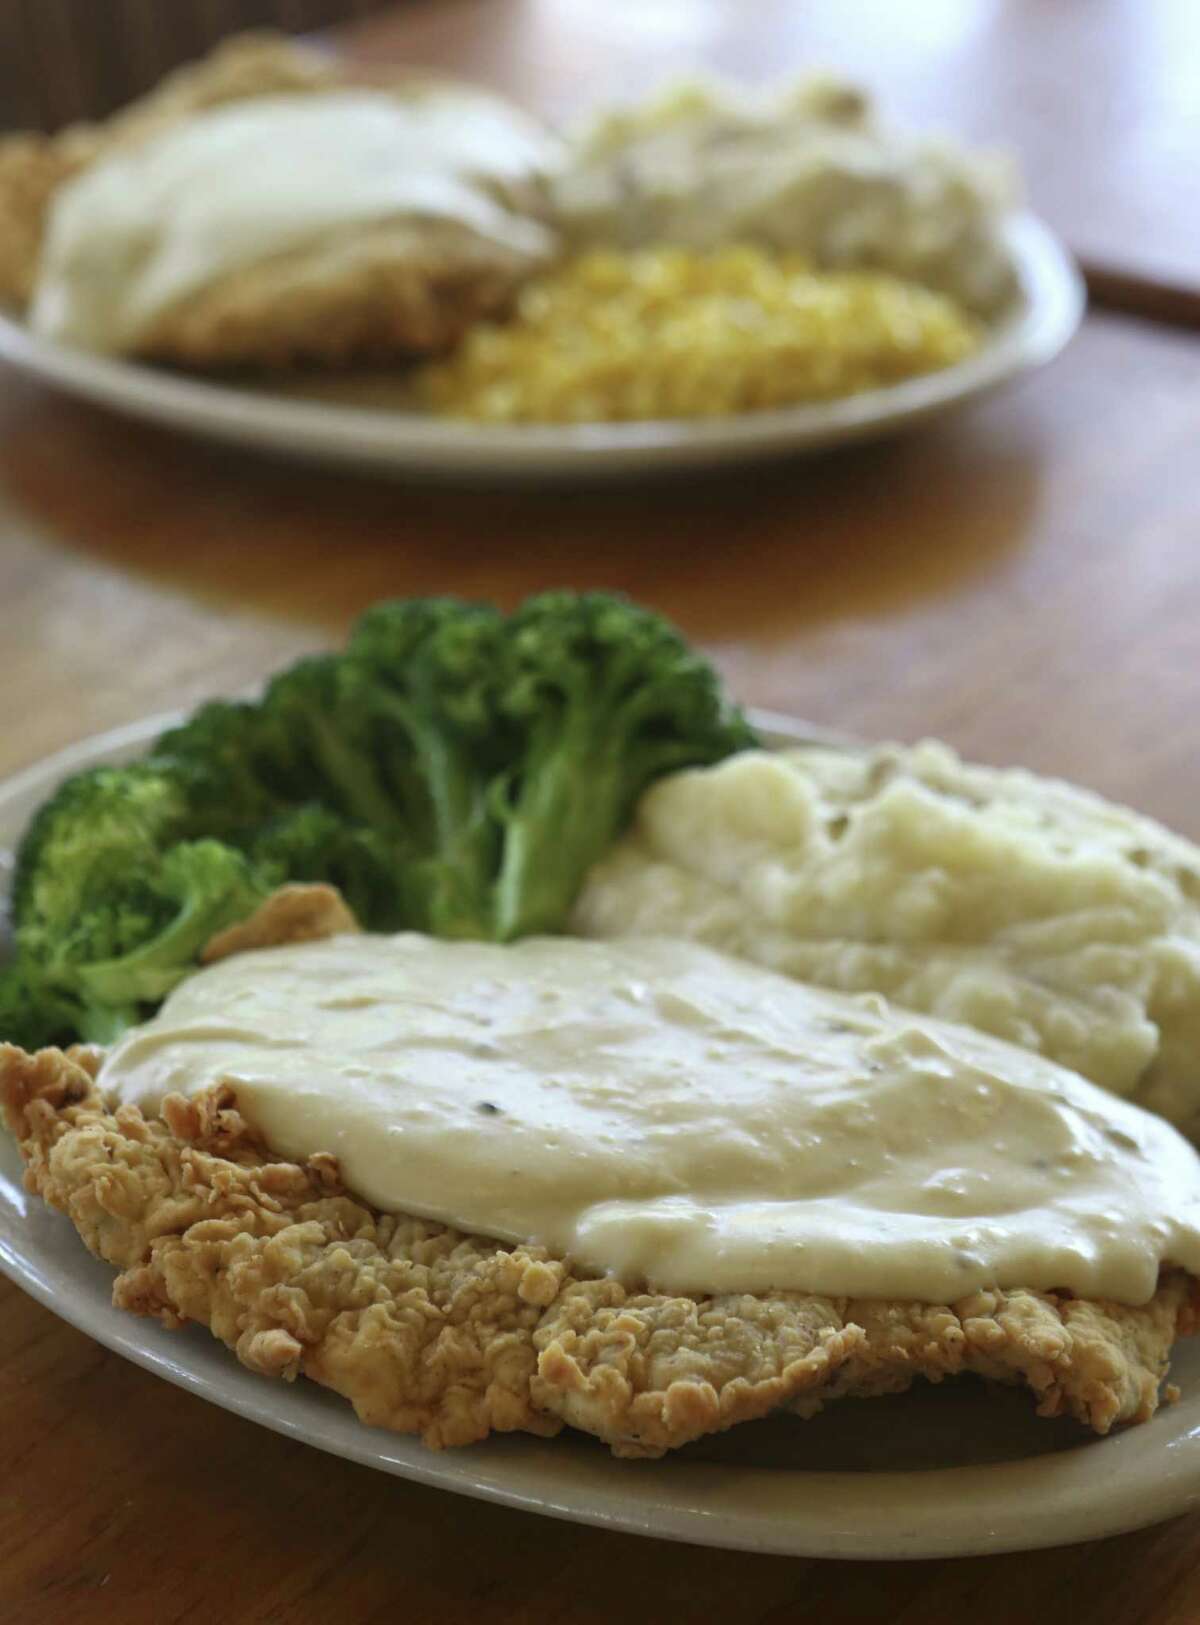 Good Time Charlie's is a finalist for the best chicken-fried steak in San Antonio.